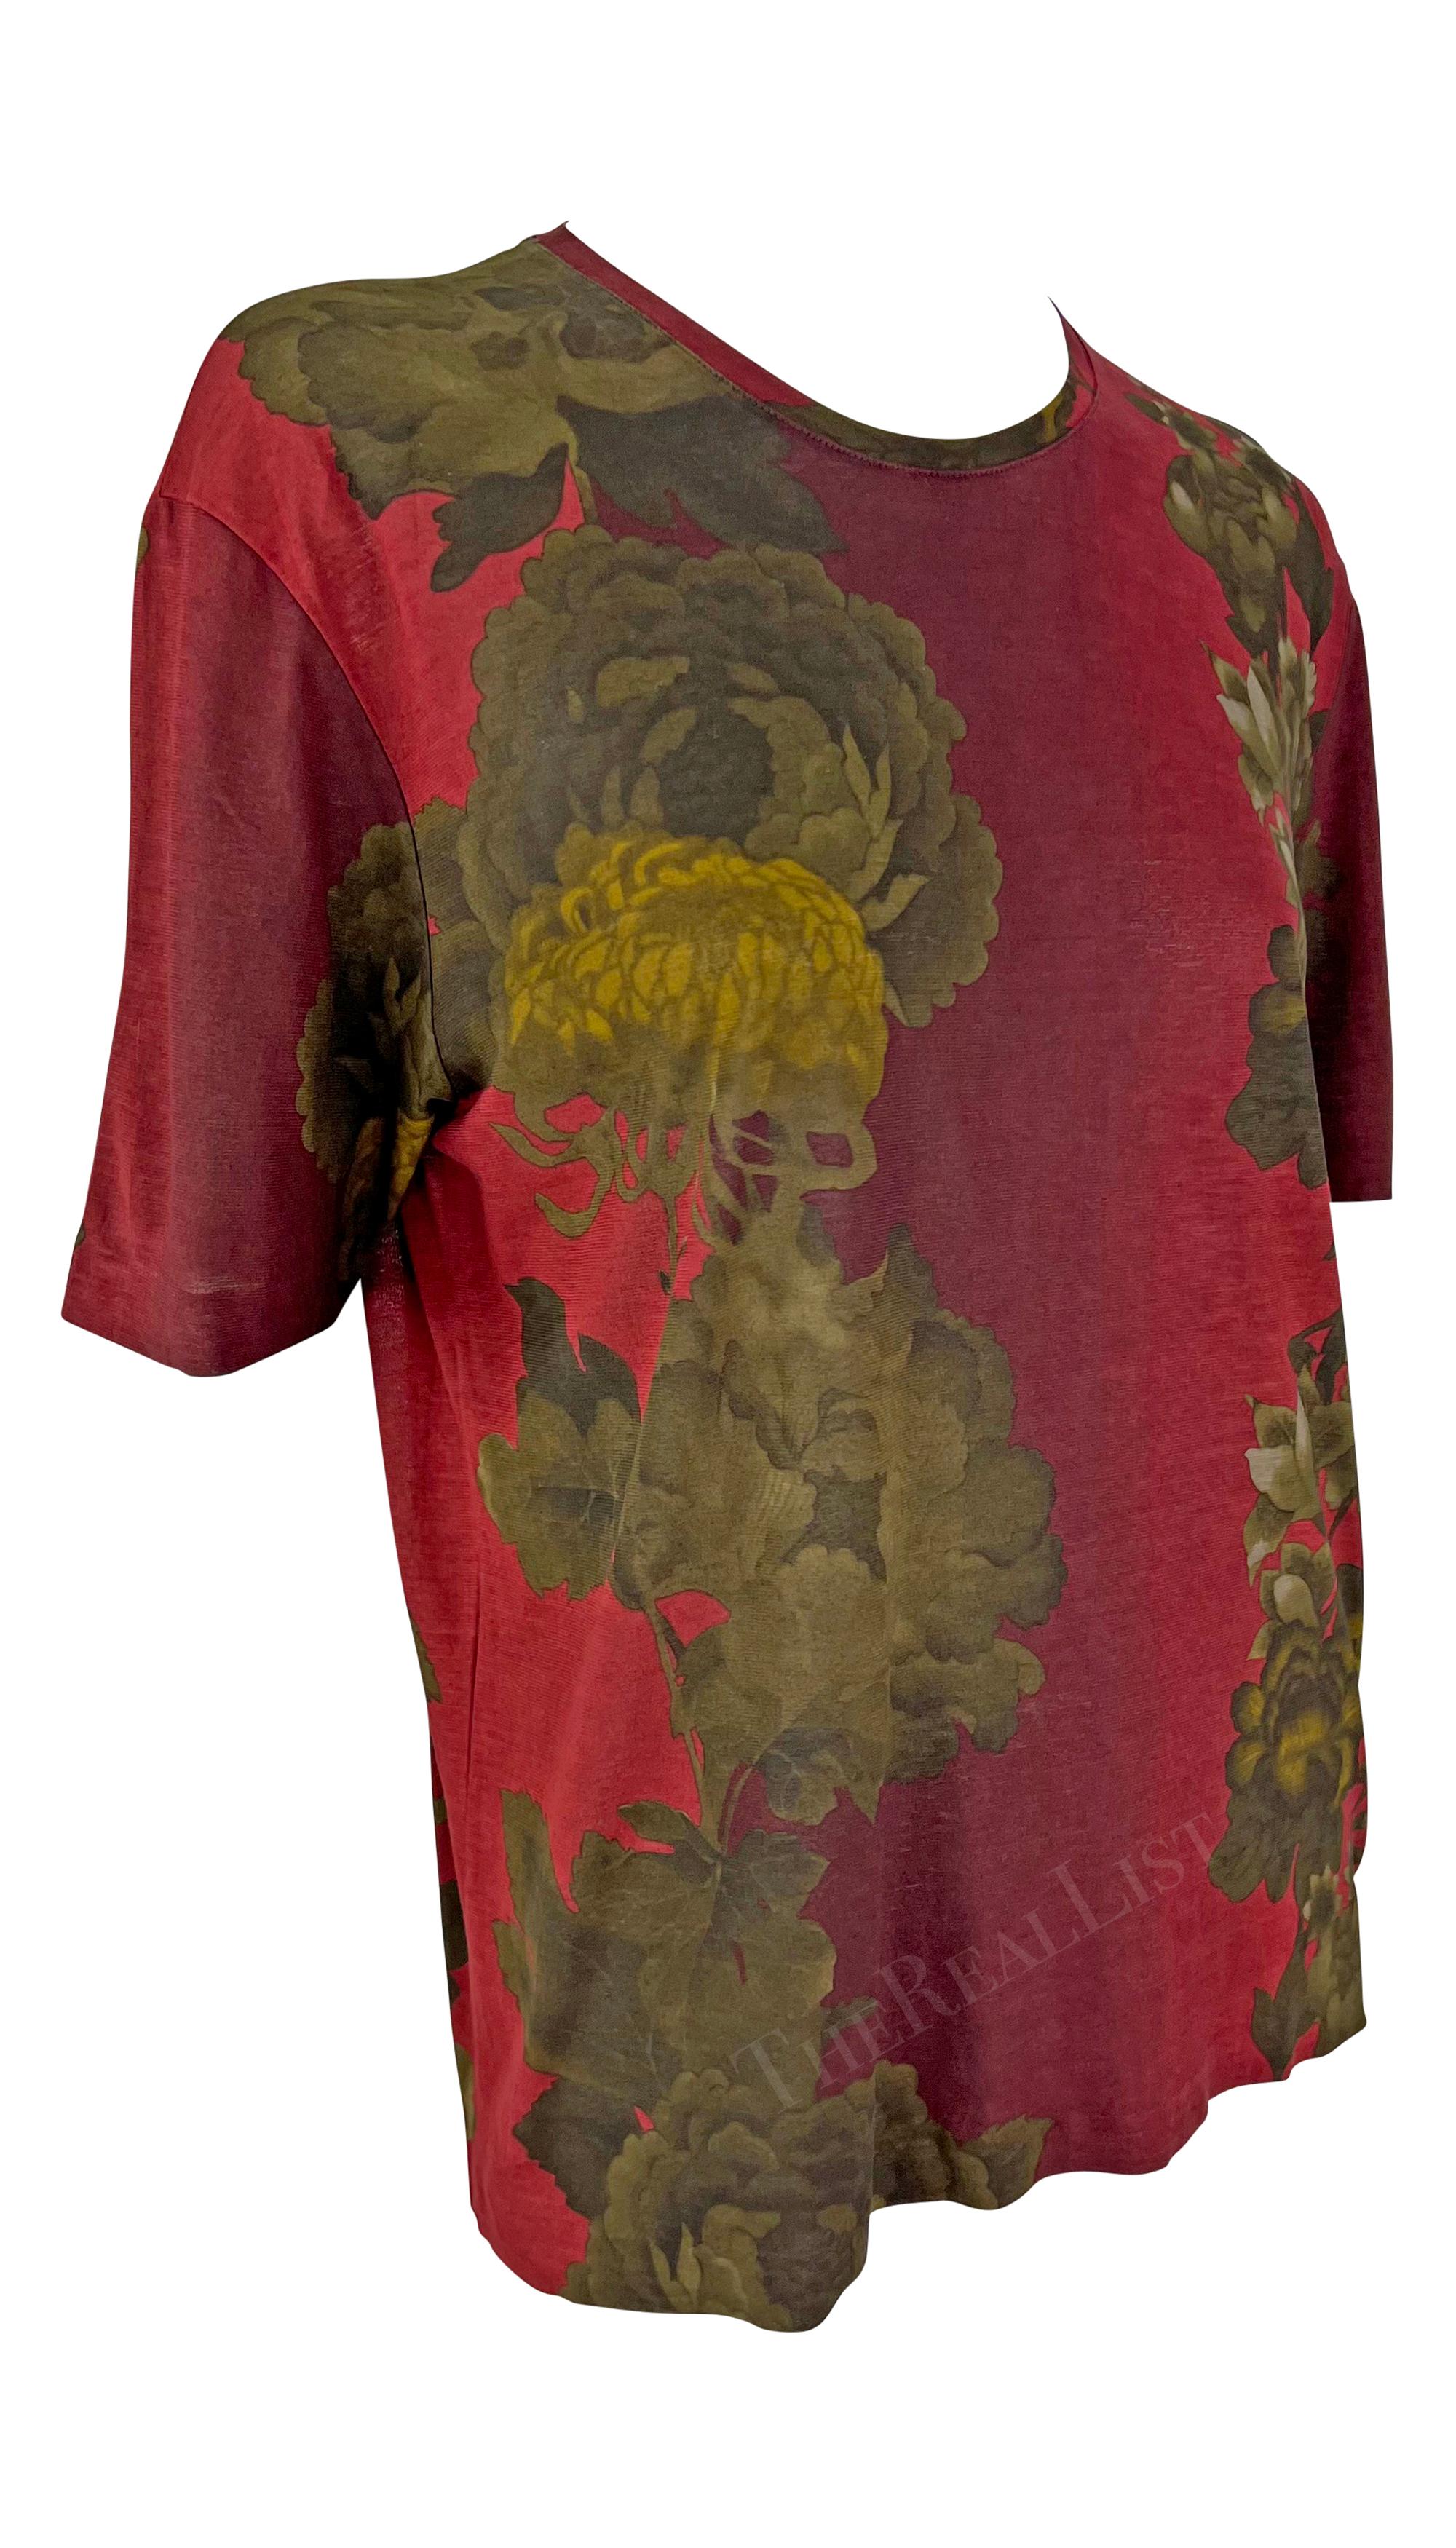 S/S 1999 Gucci by Tom Ford Red Floral Short Sleeve Men's T-Shirt For Sale 2